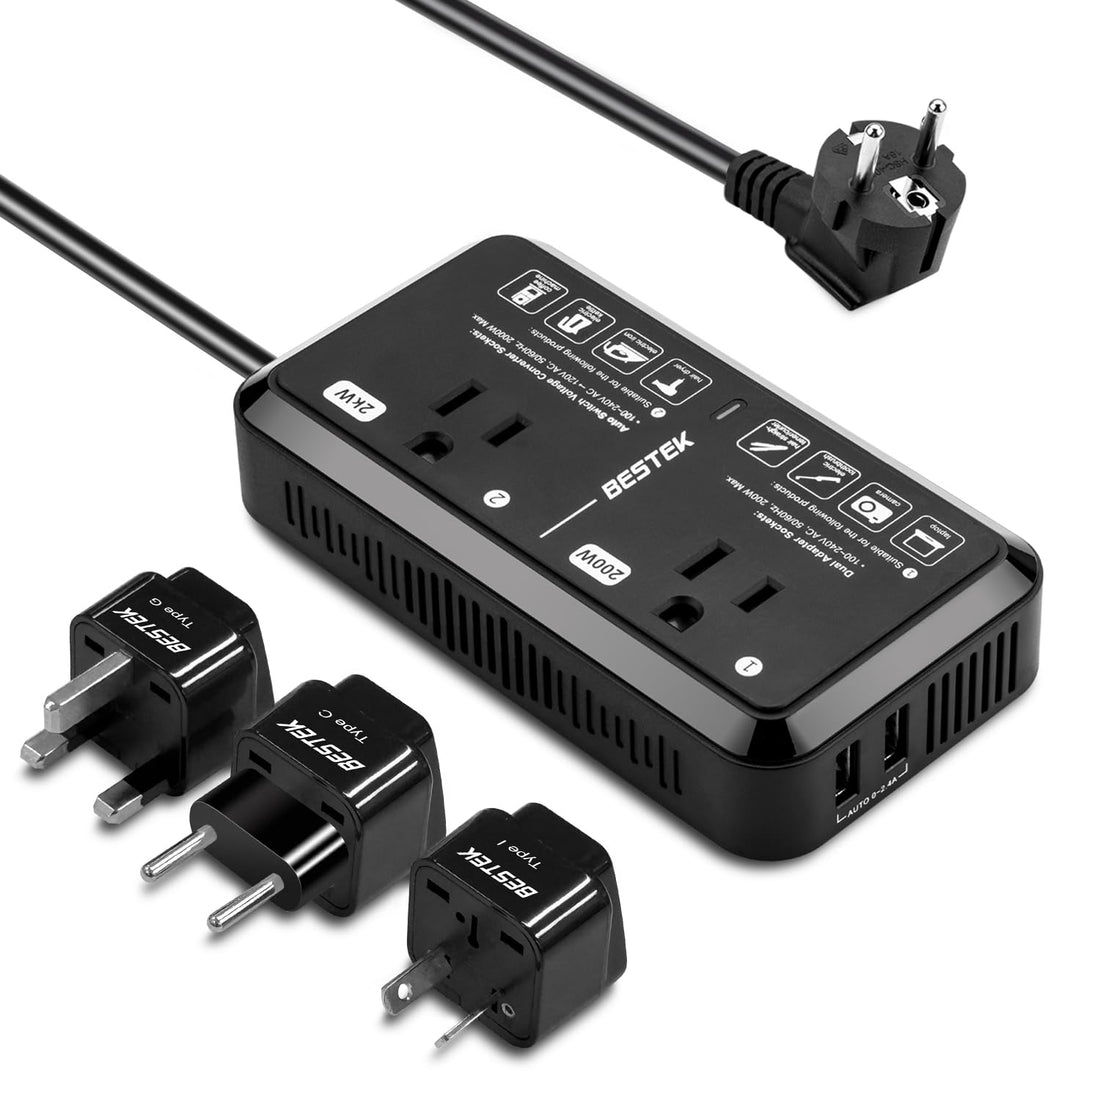 Universal Travel Adapter 220V to 110V Voltage Converter US to Europe 2000W Travel Voltage Converter with 2 USB Ports and EU/UK/AUS Plug Adapter for Hair Dryer/Curling Iron (Black)